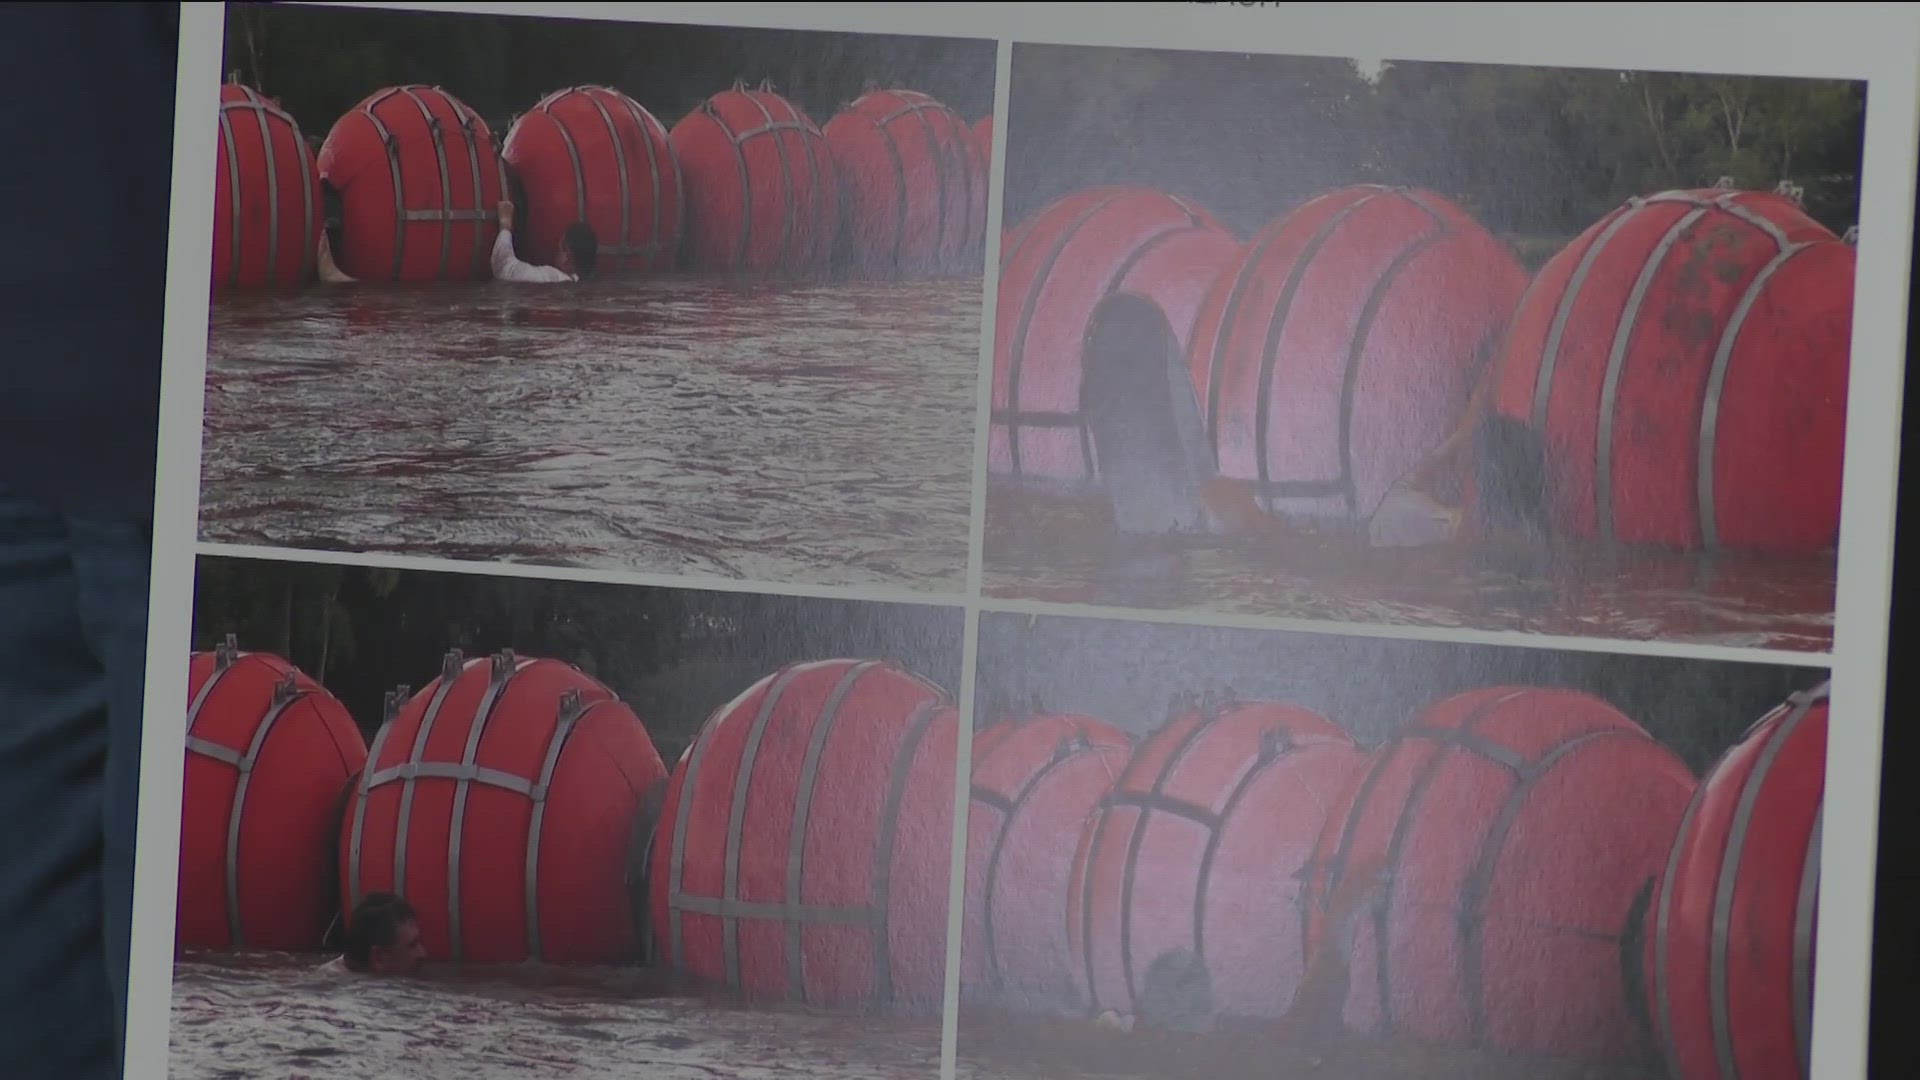 The state plans to utilize buoys along the Rio Grande River to discourage water crossings into Texas from Mexico.